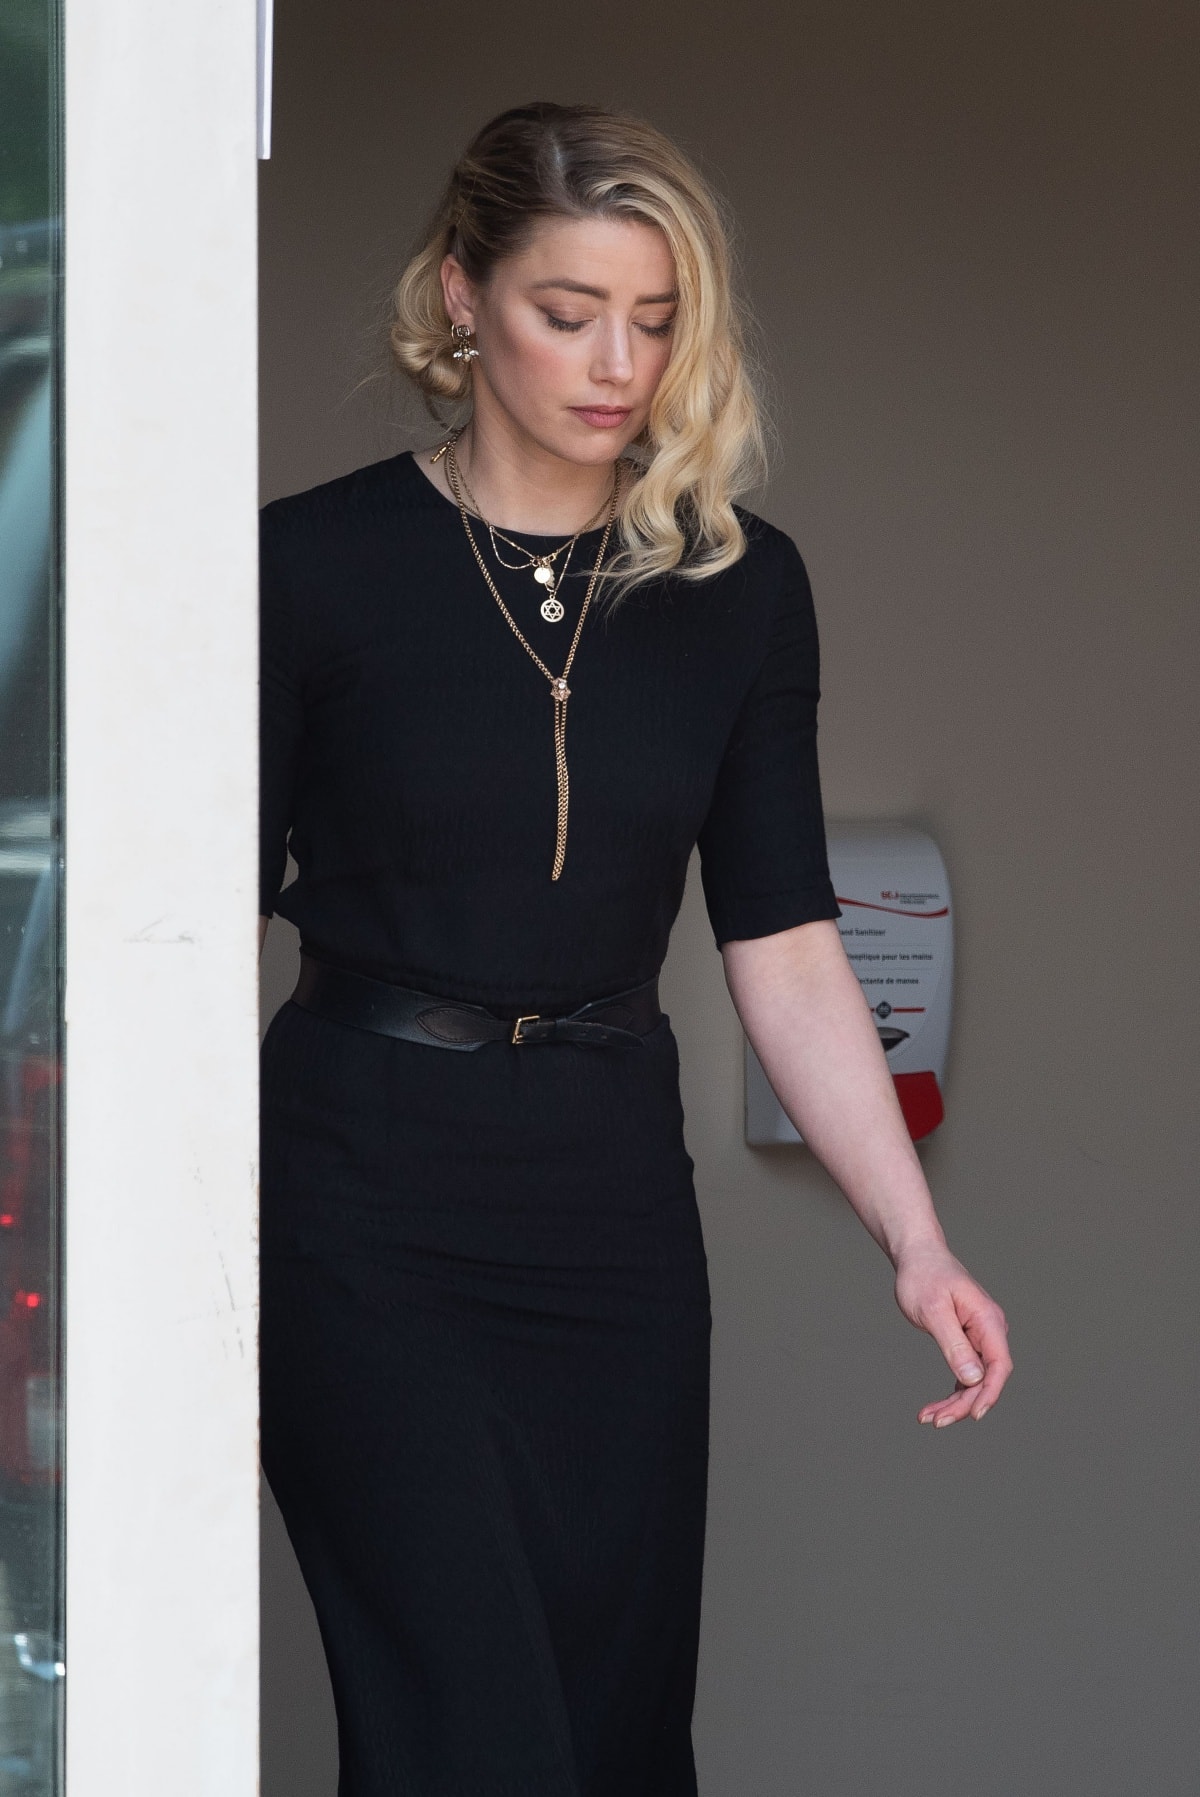 Amber Heard leaving the Fairfax County Courthouse after hearing the verdict